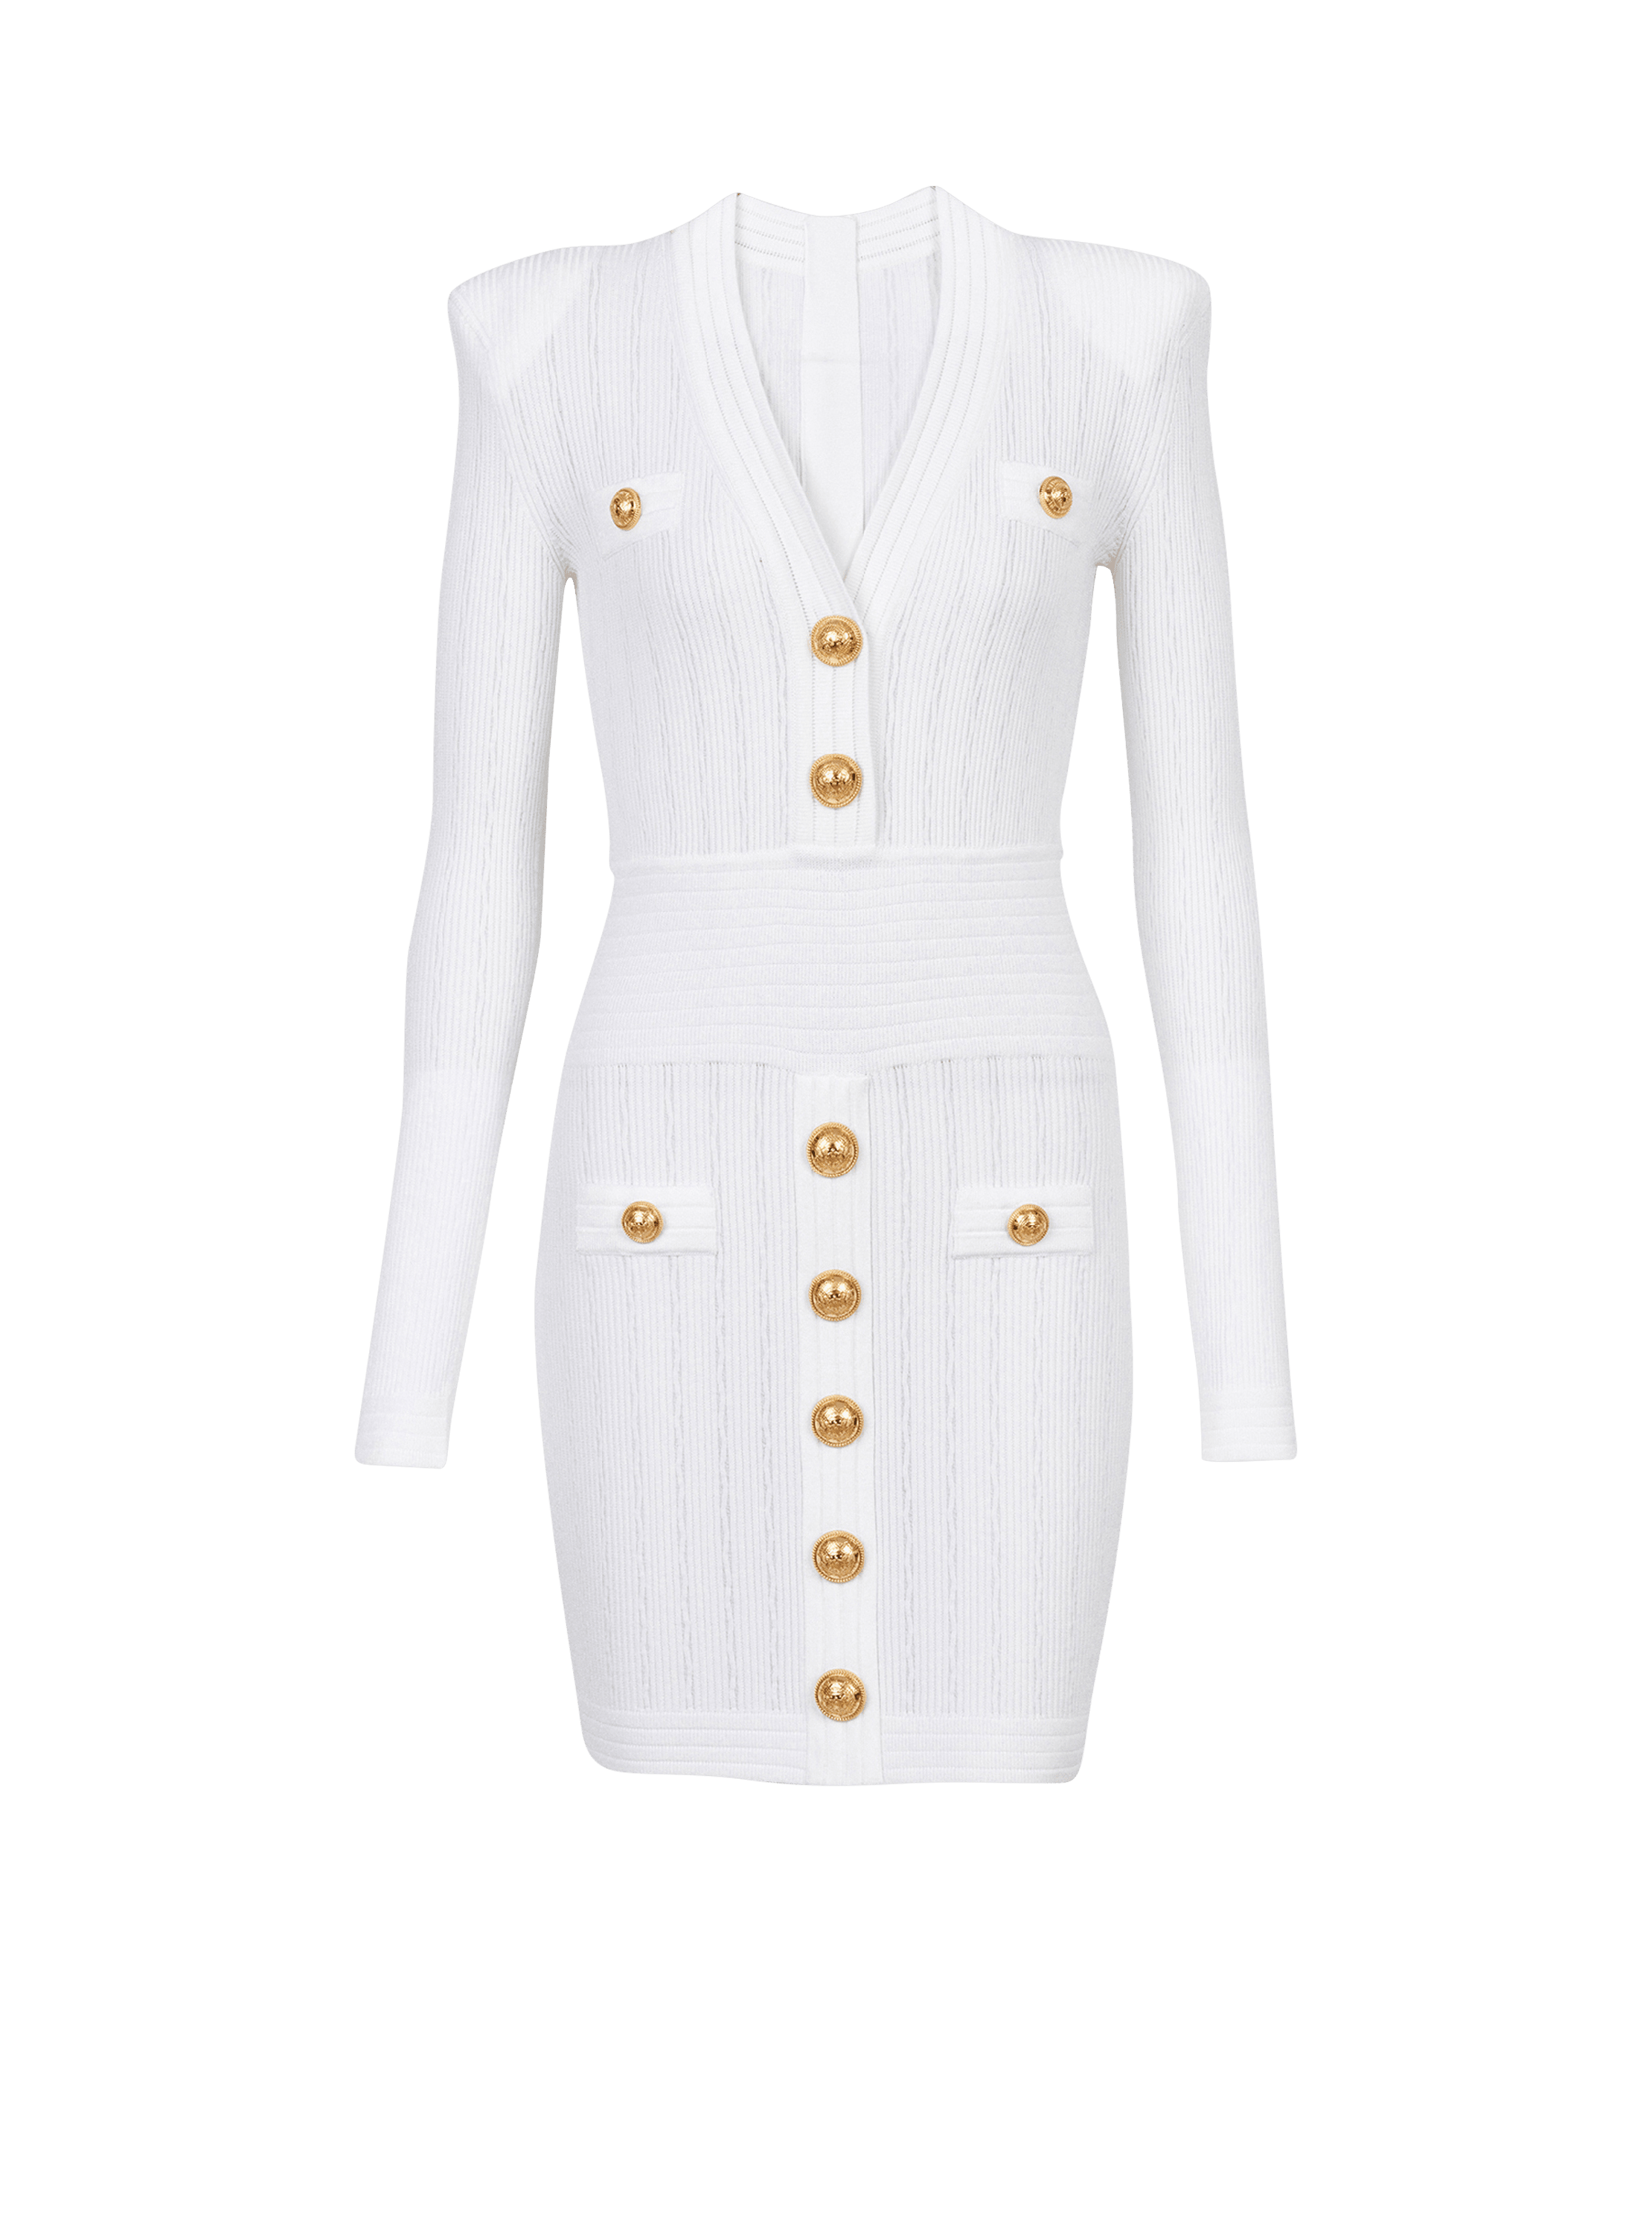 Robe Bouton d'Or 36/38